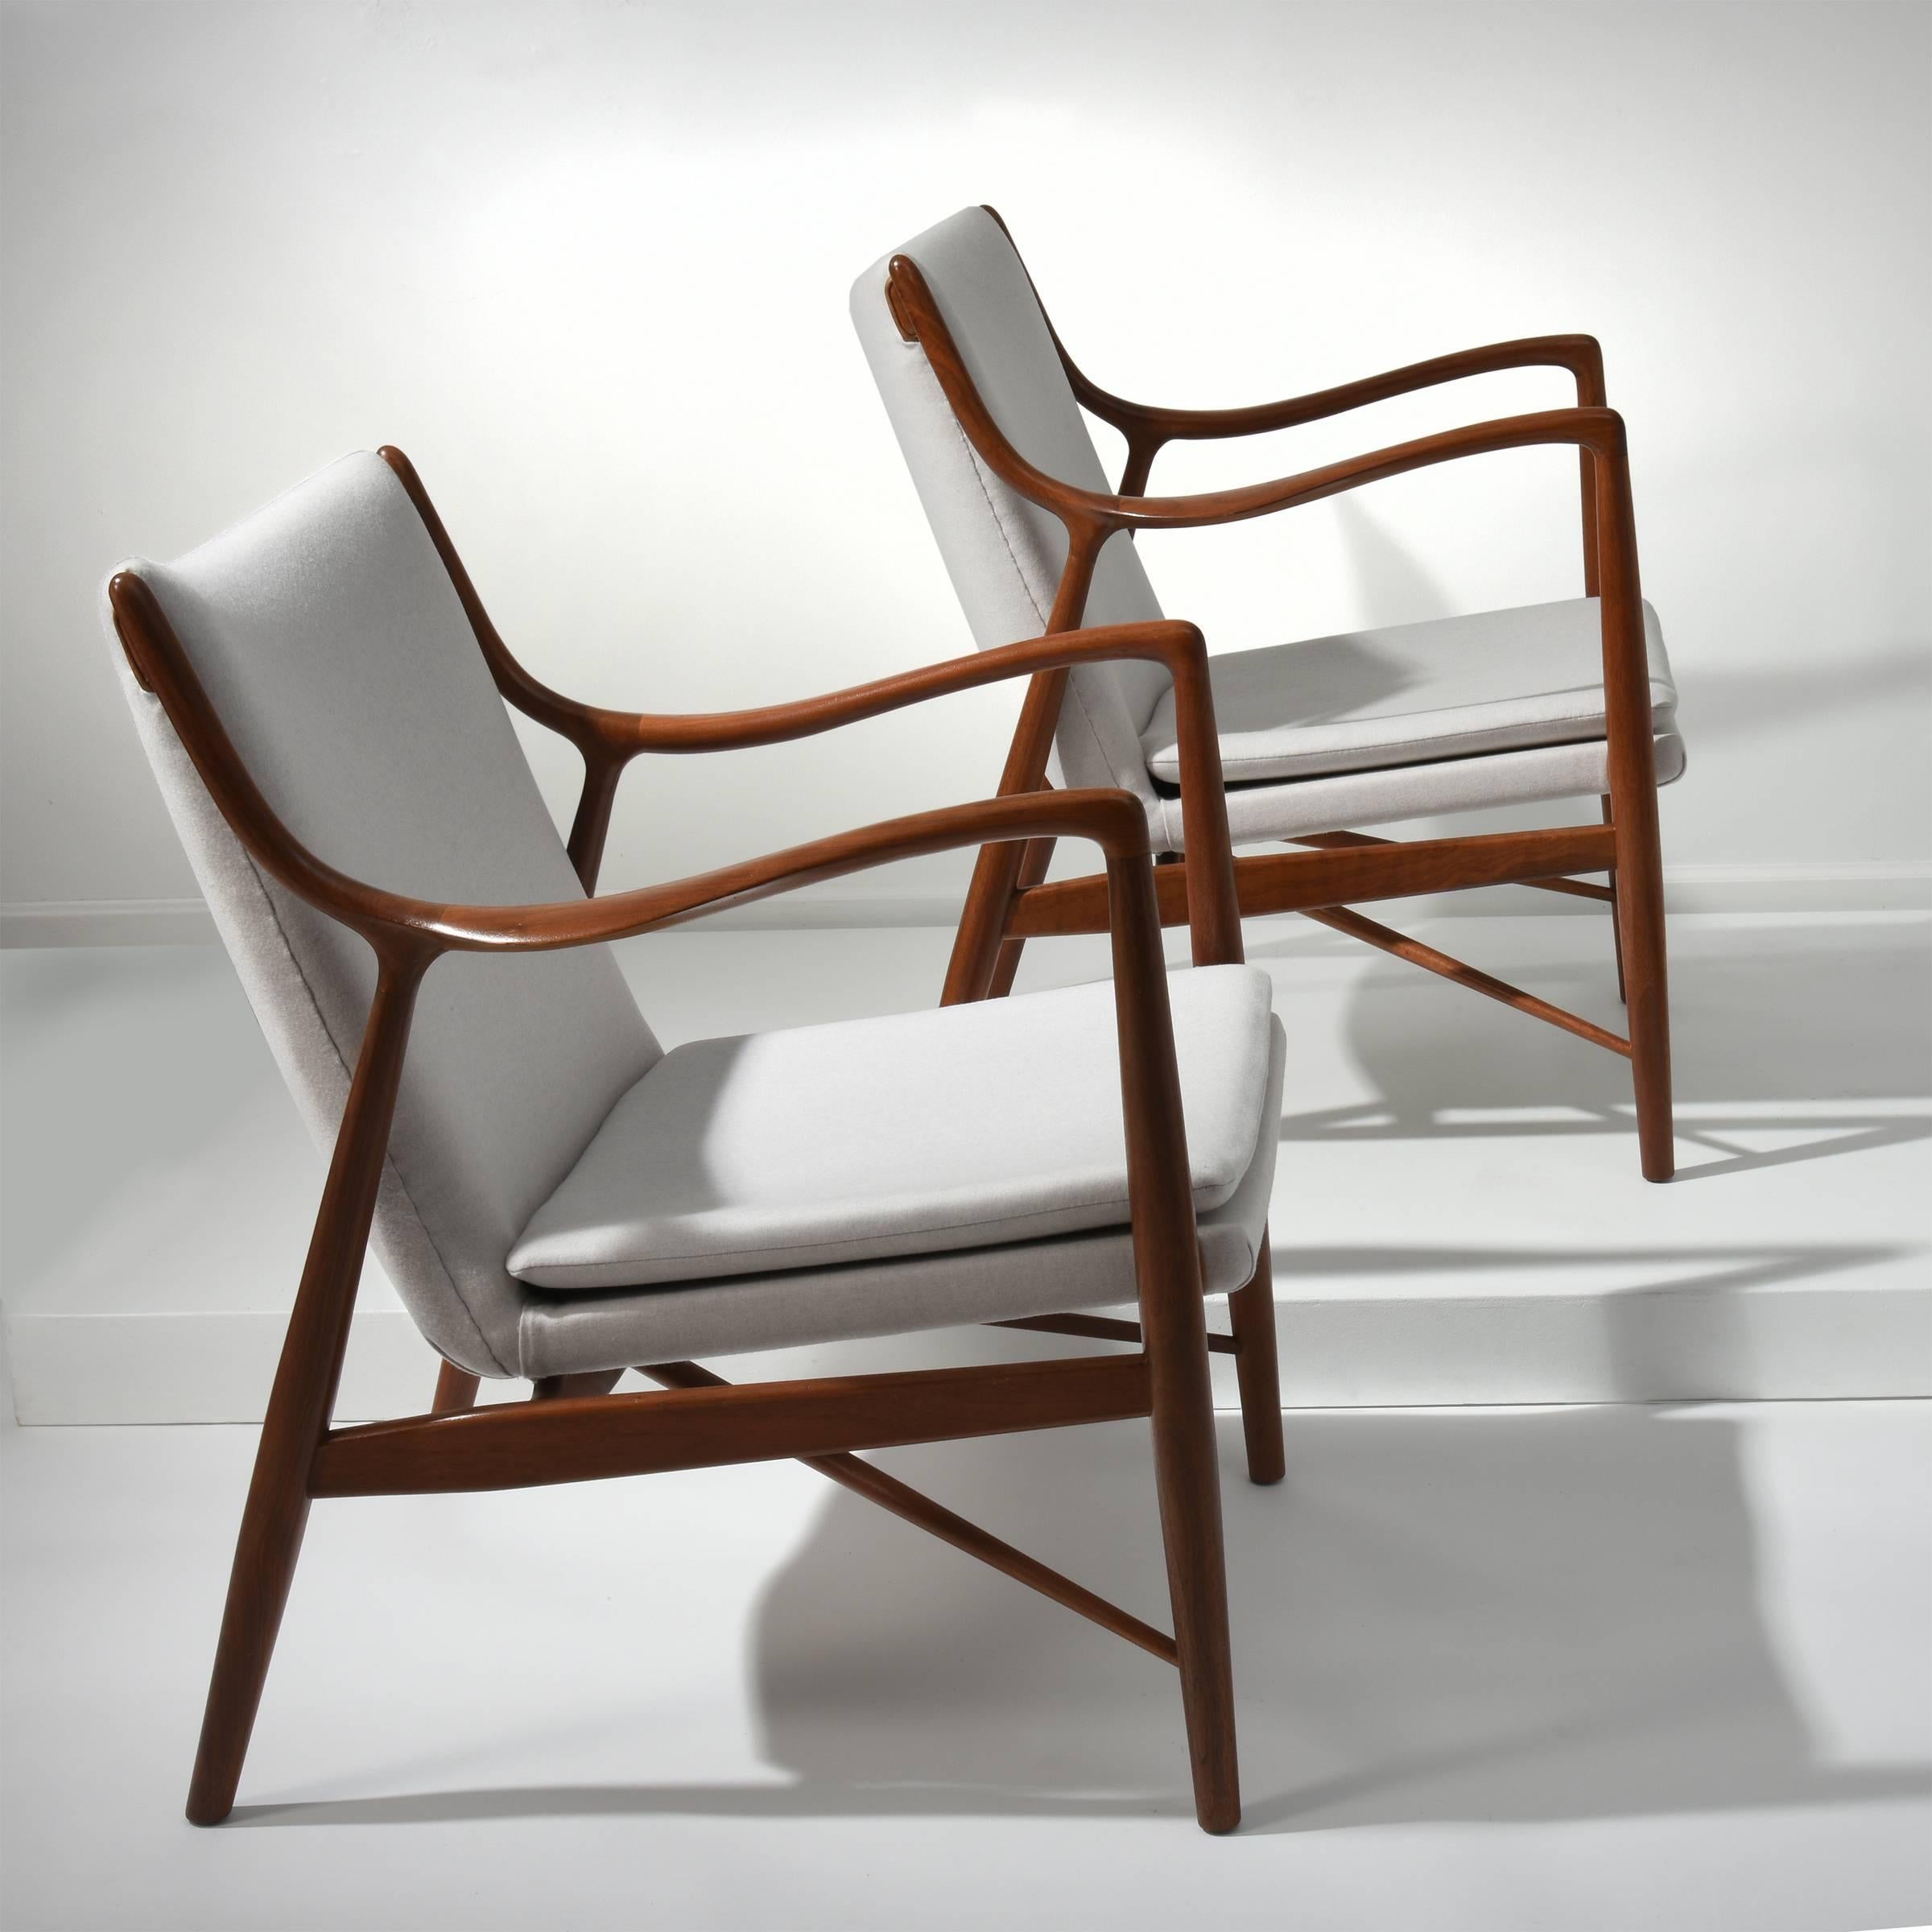 Leather Finn Juhl Pair of Lounge Chairs, 1950s